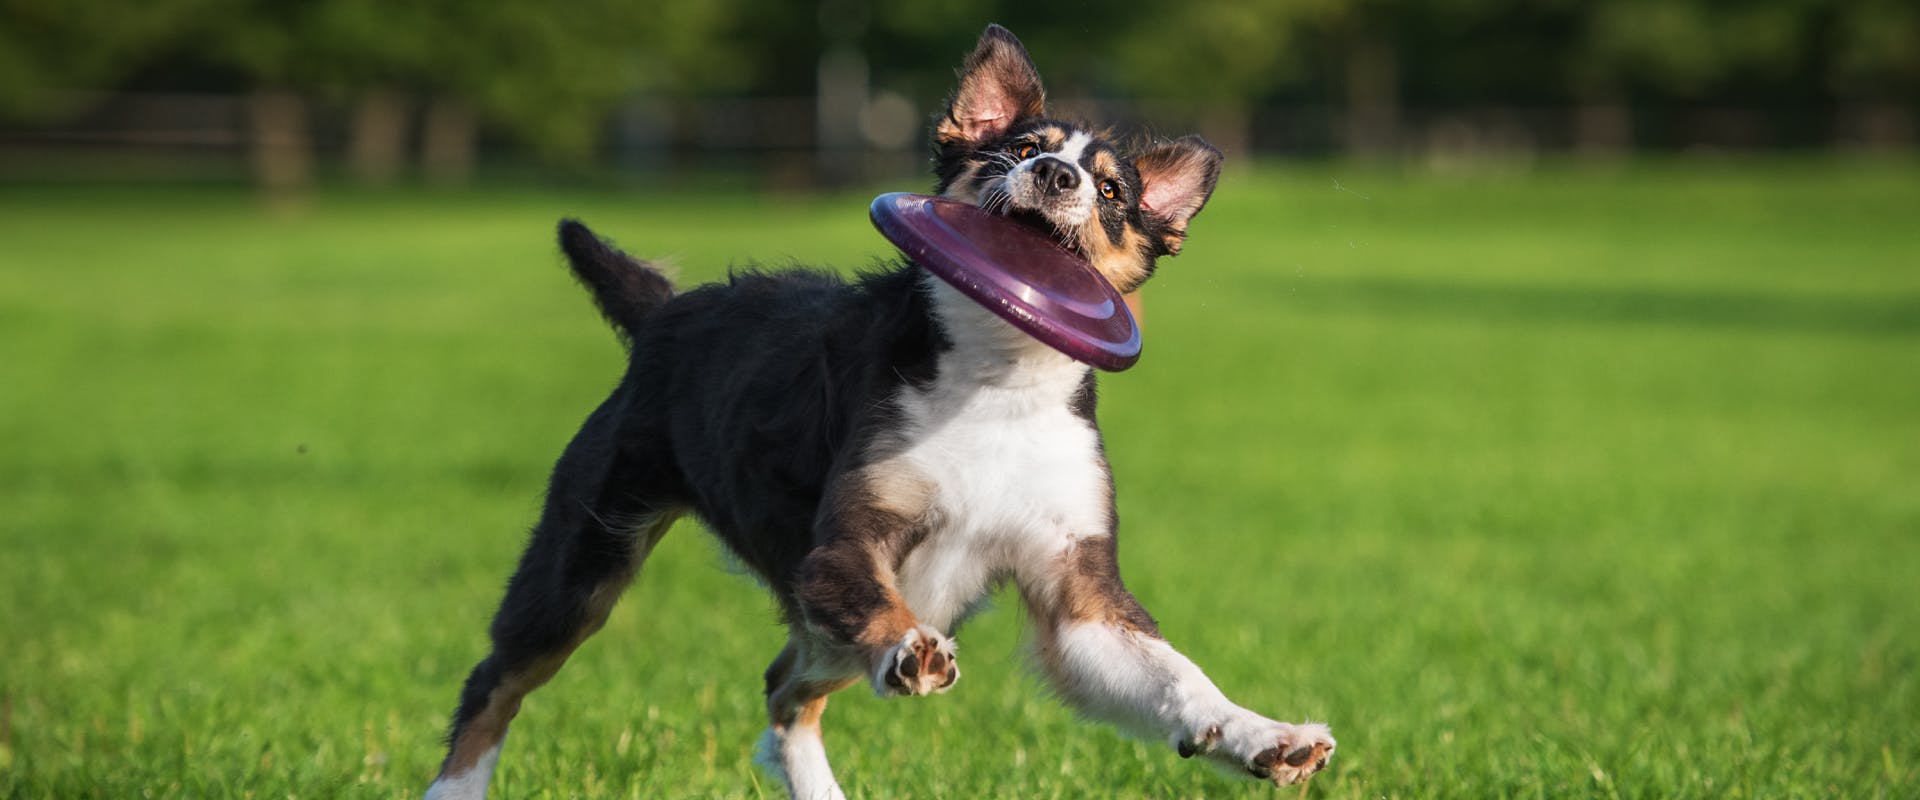 a tri-colored high-energy breed puppy running across some grass with a purple frisbee in its mouth